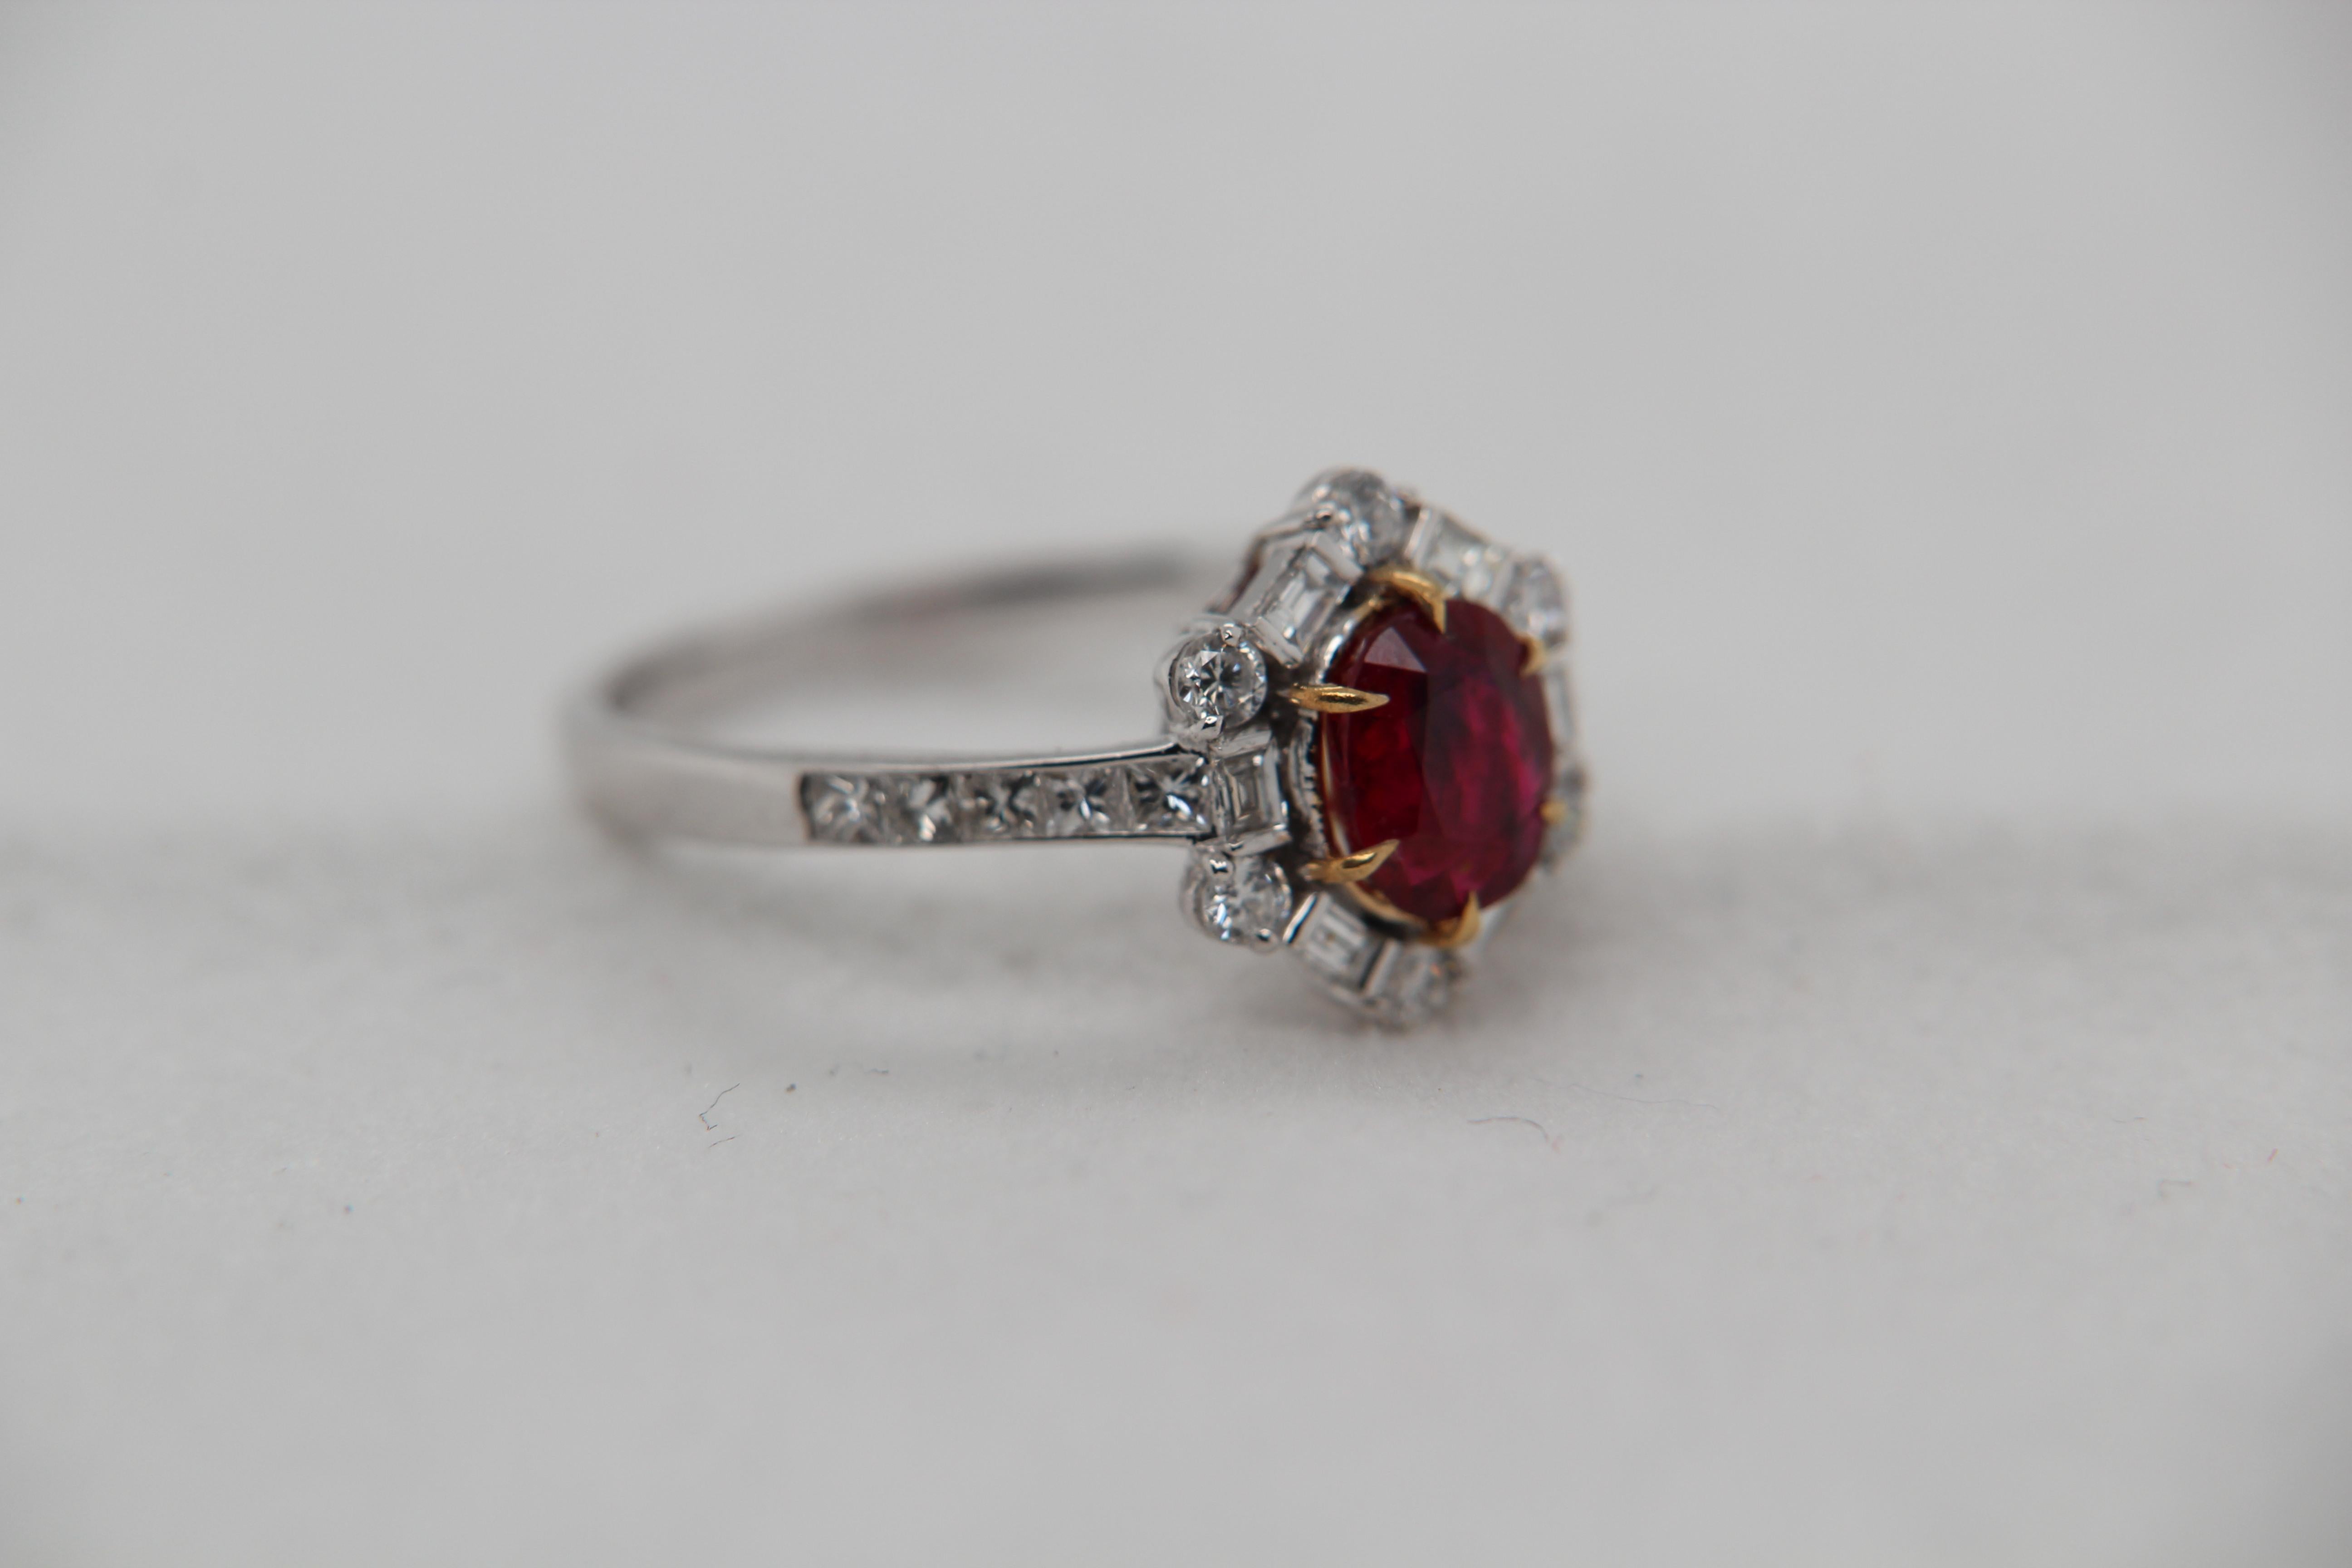 A brand new 1.02 carat Burmese ruby ring mounted with diamonds in 18 Karat gold. The ruby weighs 1.02 carat and is certified by Gem Research Swisslab (GRS) as natural, no heat, and 'Vivid Red Pigeon's Blood'. The total diamond weight is 0.63 carat